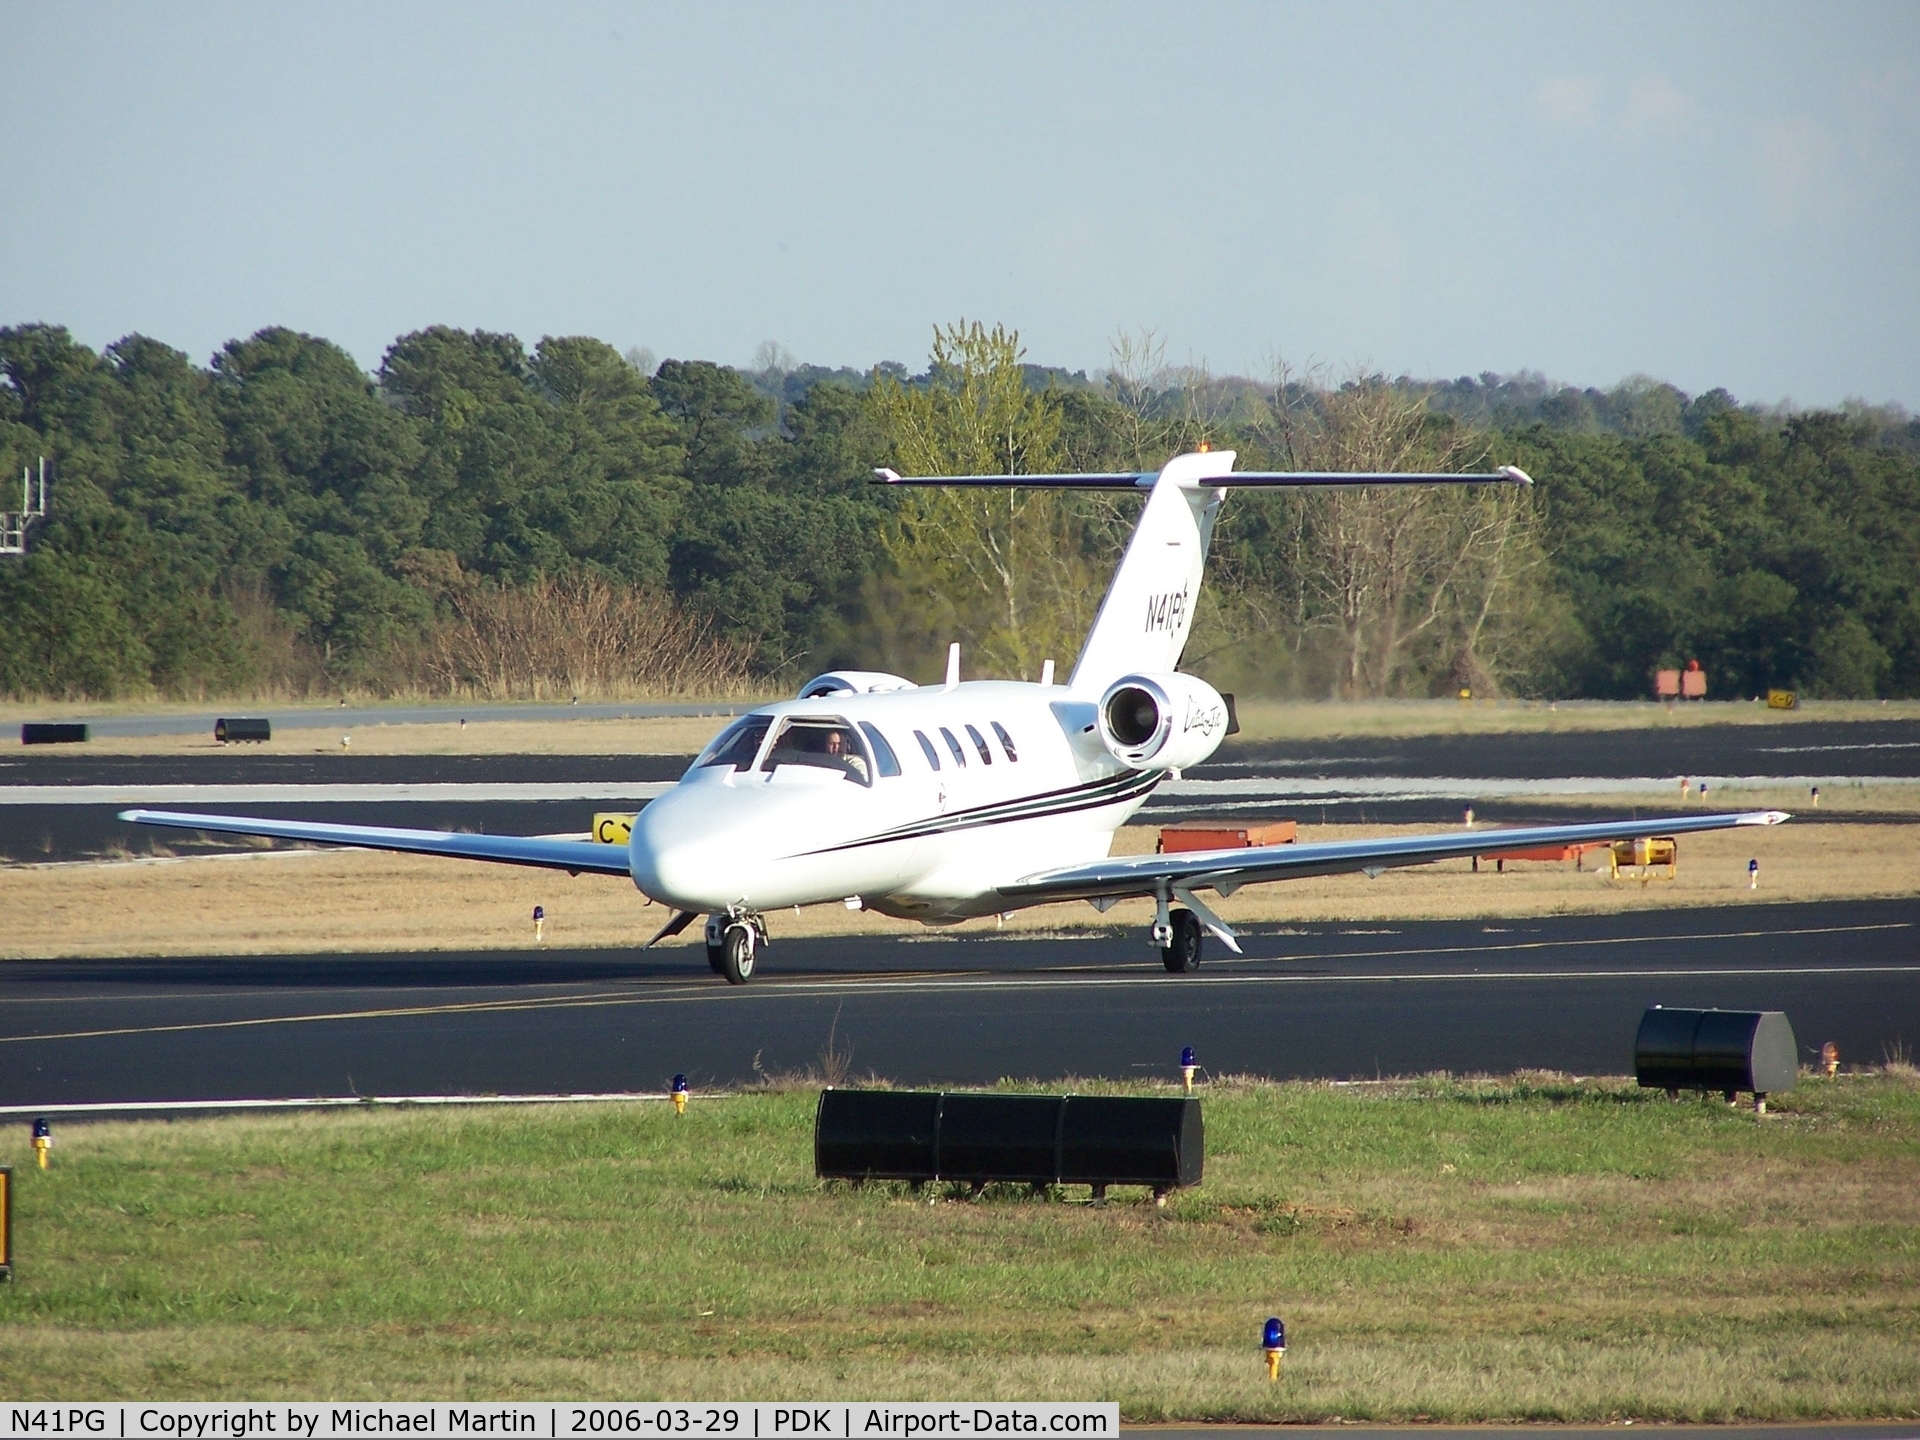 N41PG, 1997 Cessna 525 C/N 525-0175, Taxing from Mercury Air Service